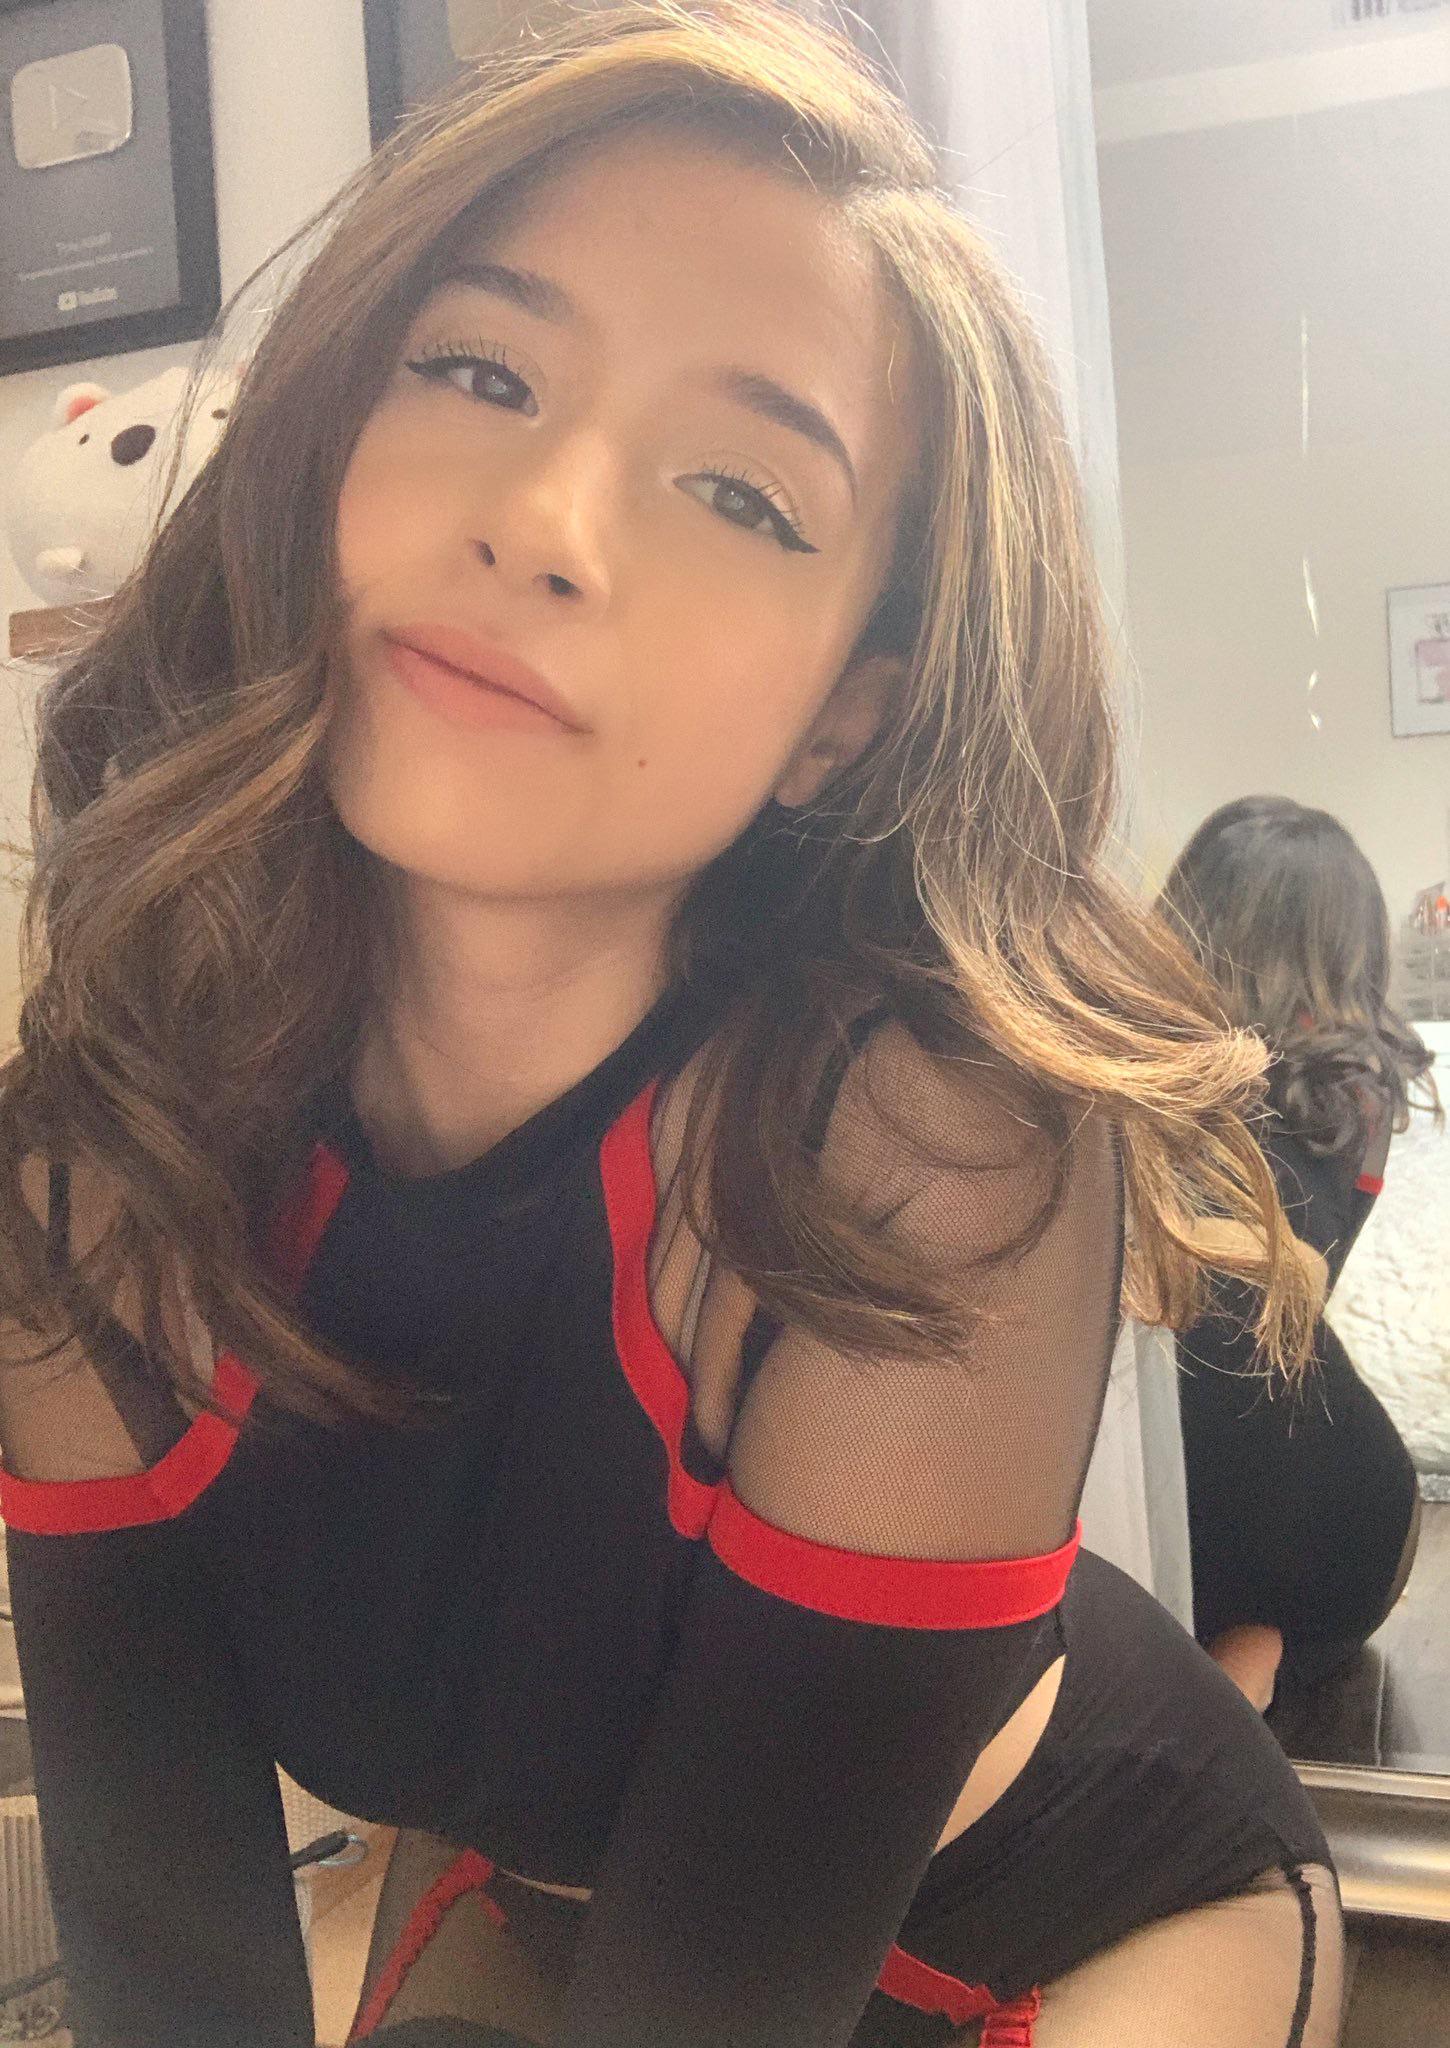 I love how Pokimane makes sure her ass is also in this pic